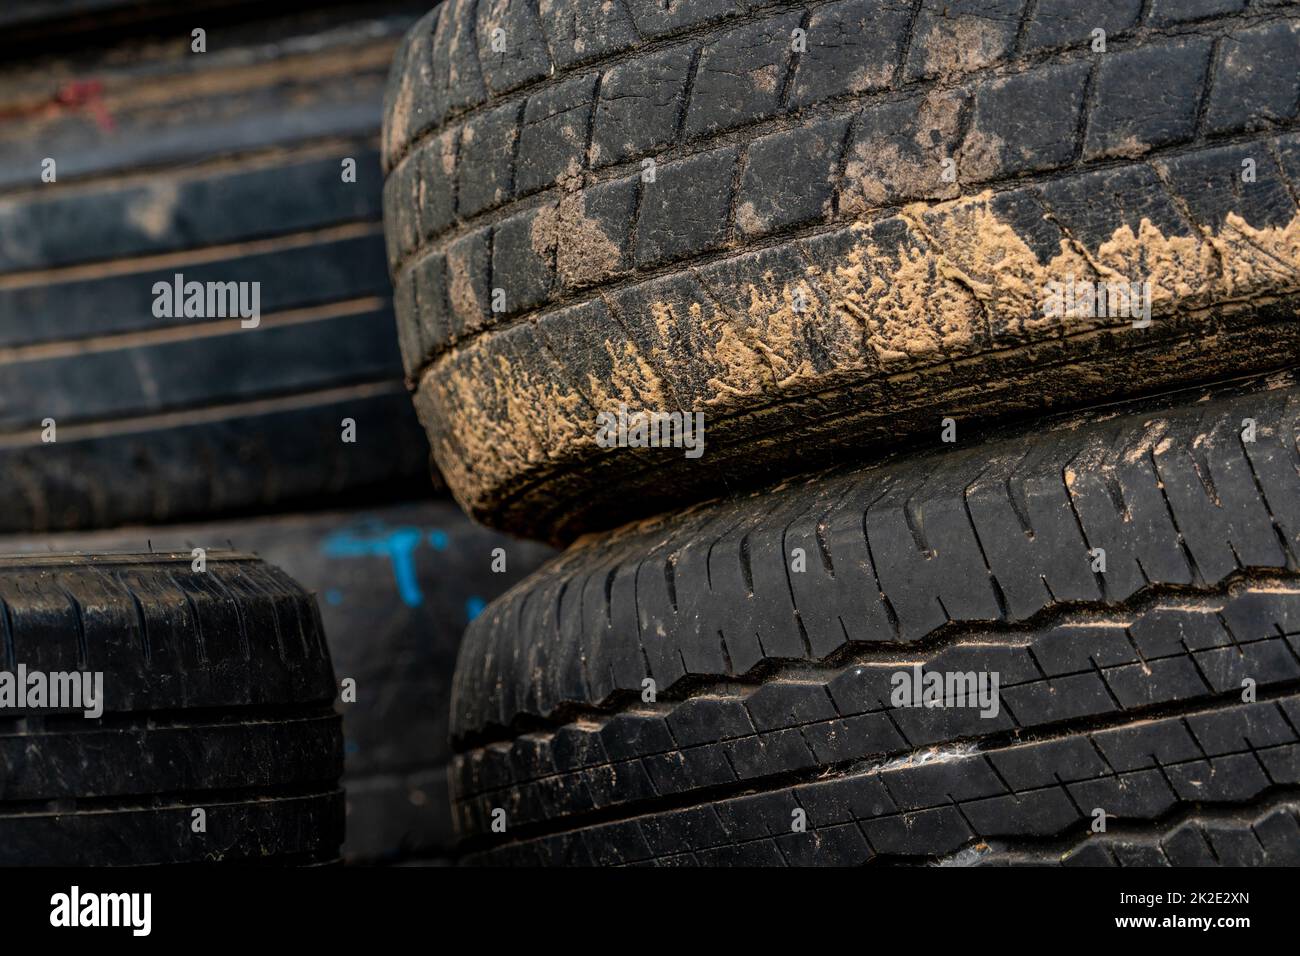 Stack of old tires. Pile of used tires. Black rubber tire of car. Dirty used tyres. Closeup old tyres waste for recycle. Closeup tread of an old dirty tyre. Change car tire for safety concept. Stock Photo